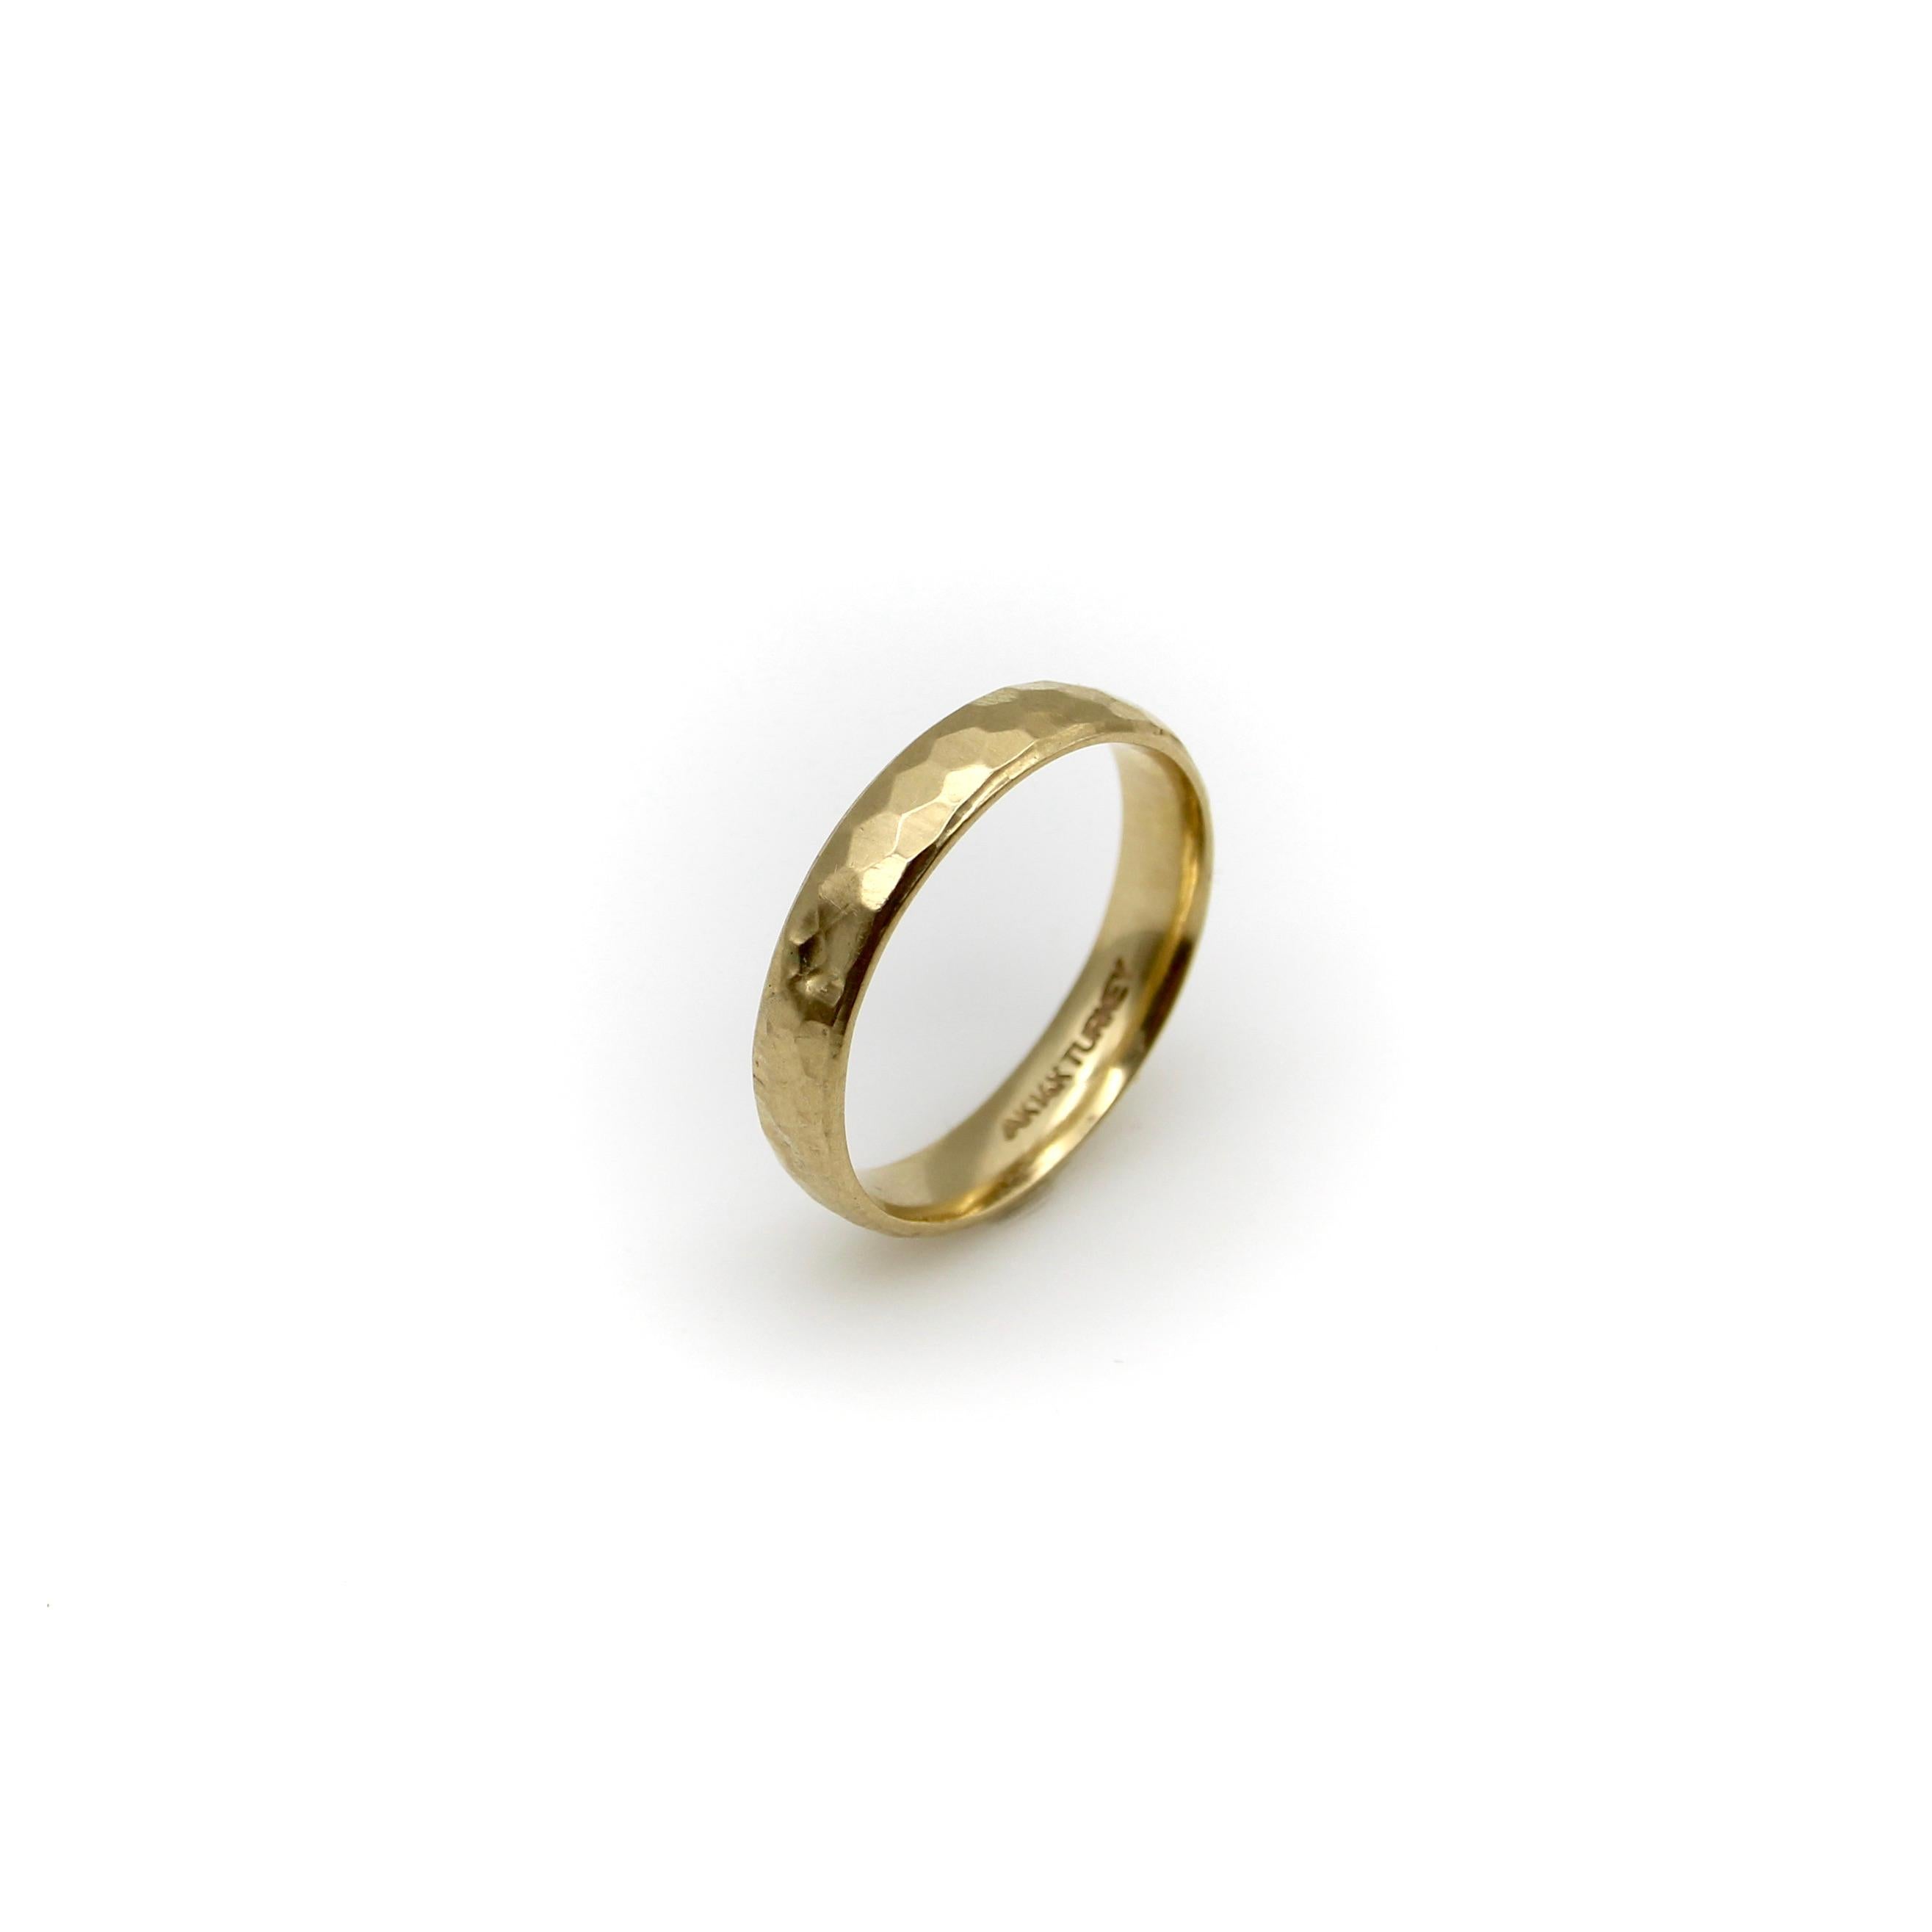 This hammered 14k gold band is a perfect staple in any jewelry collection. Its hollow construction keeps the ring’s gold weight down and allows for the maximum bang for your buck! A hammered surface textures the ring for a faceted look with